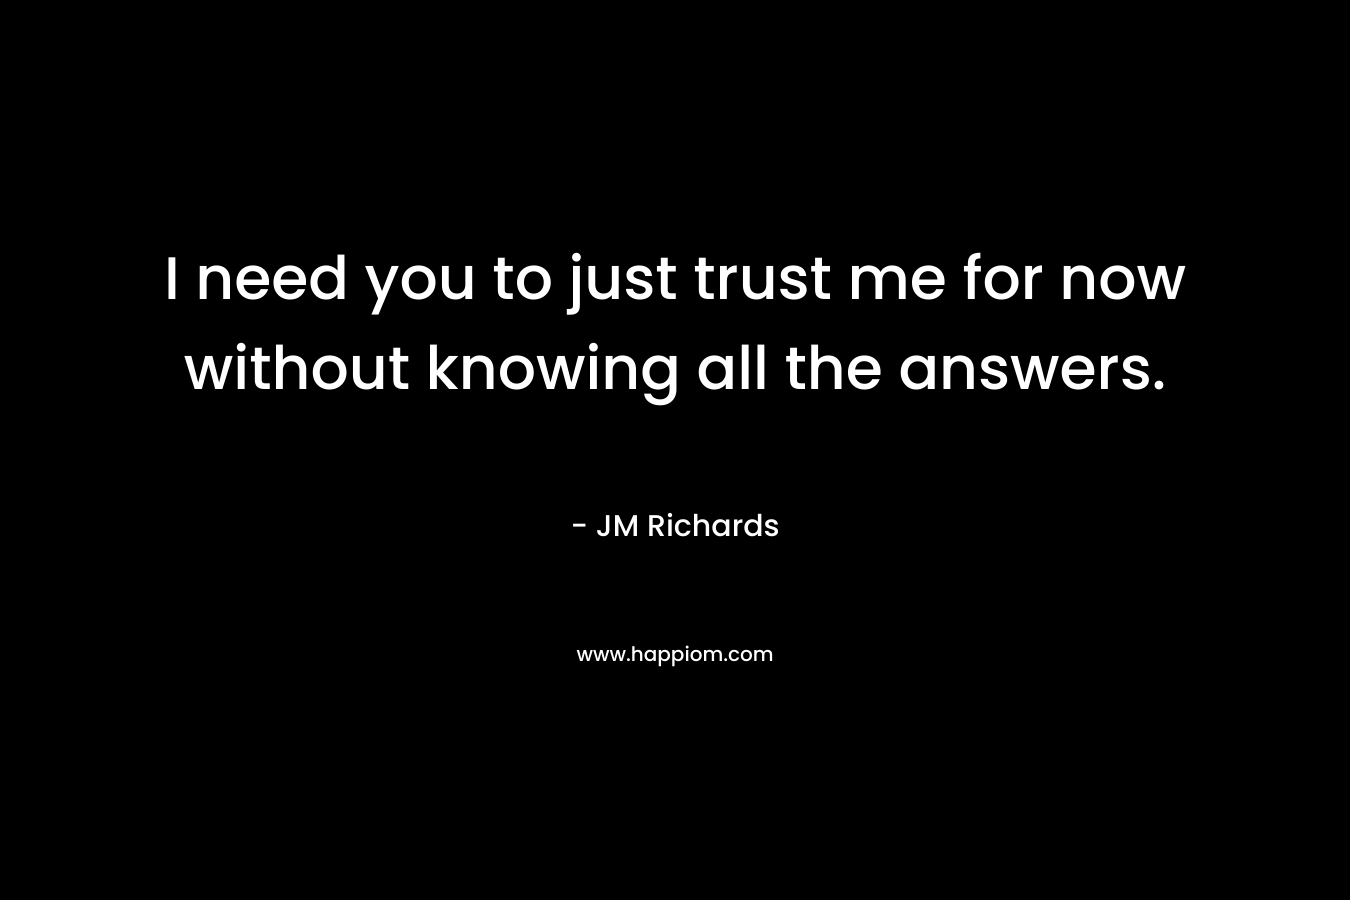 I need you to just trust me for now without knowing all the answers.